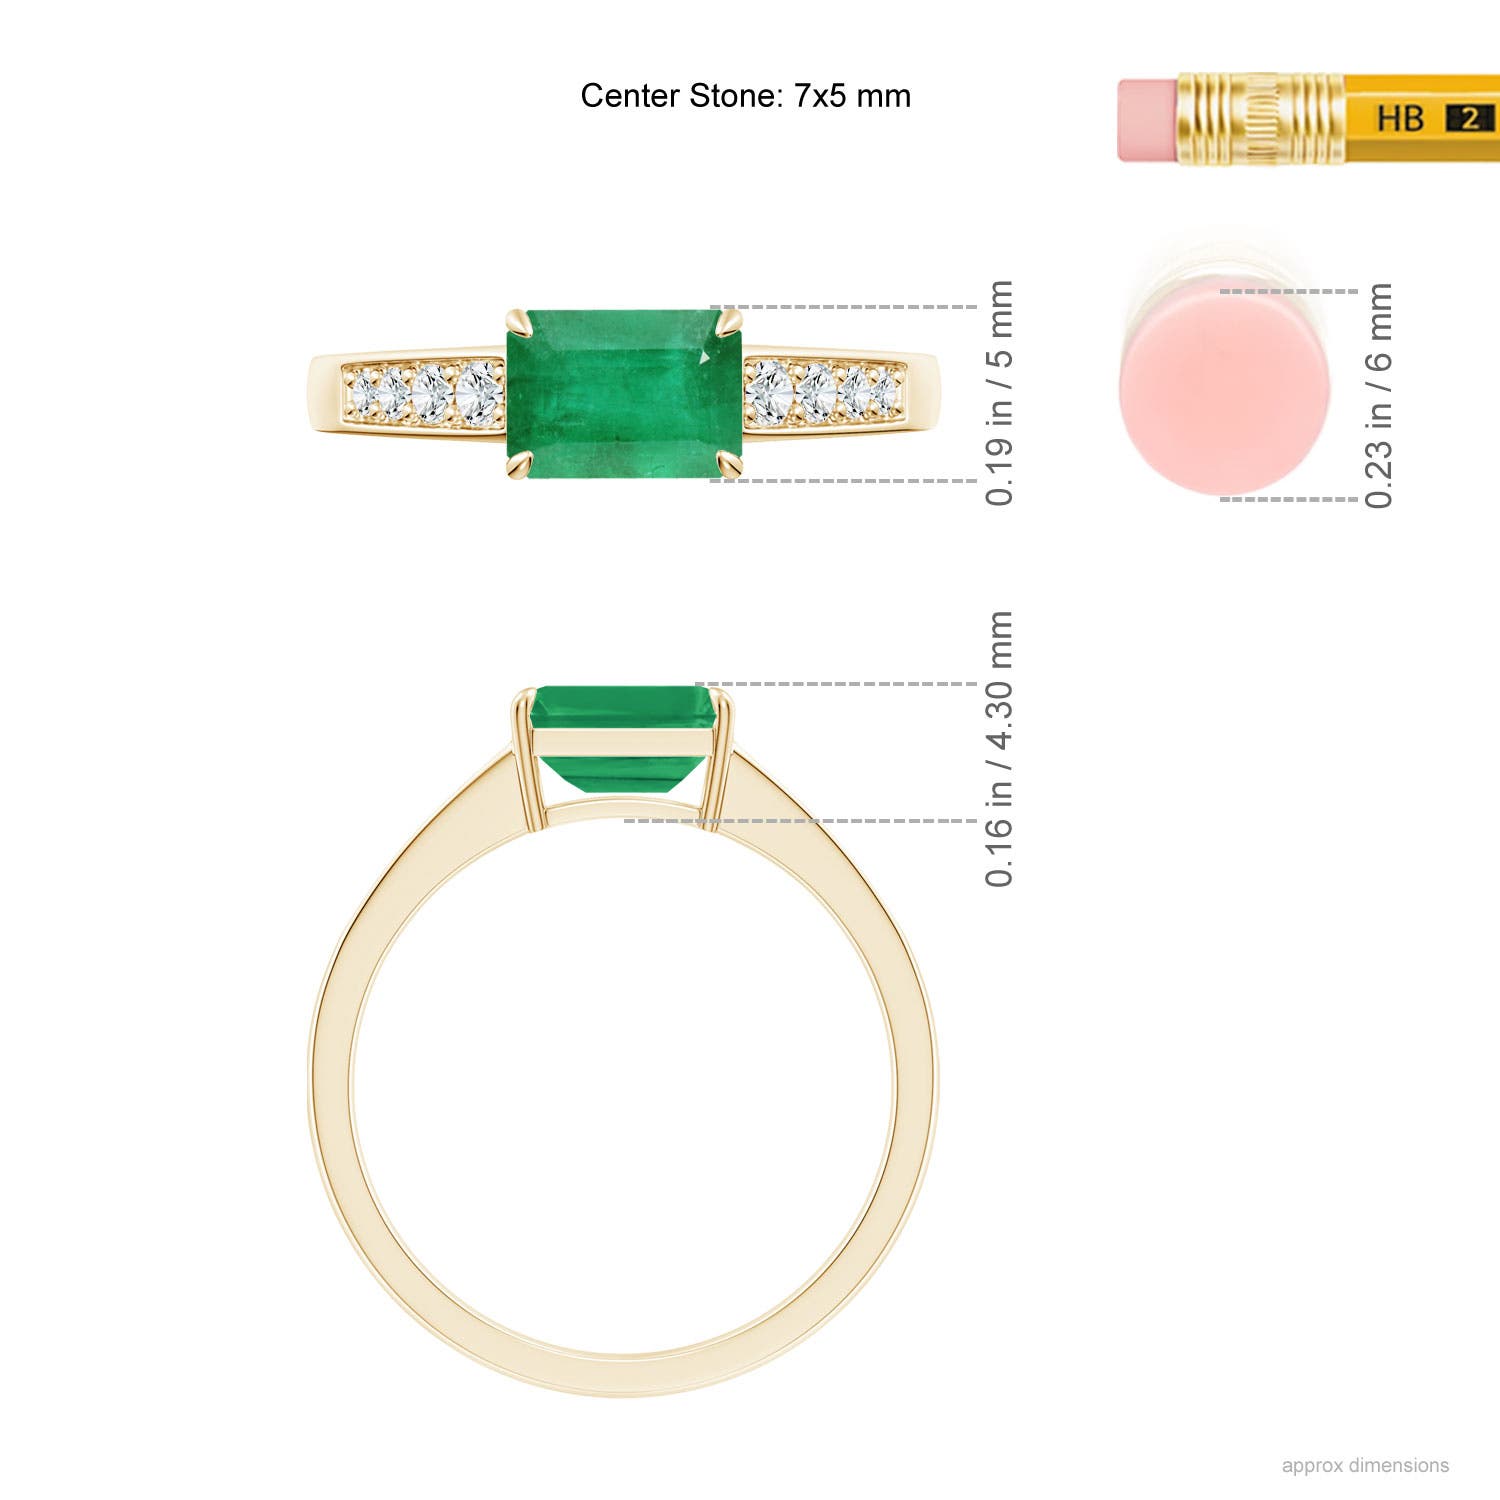 A - Emerald / 1.18 CT / 14 KT Yellow Gold